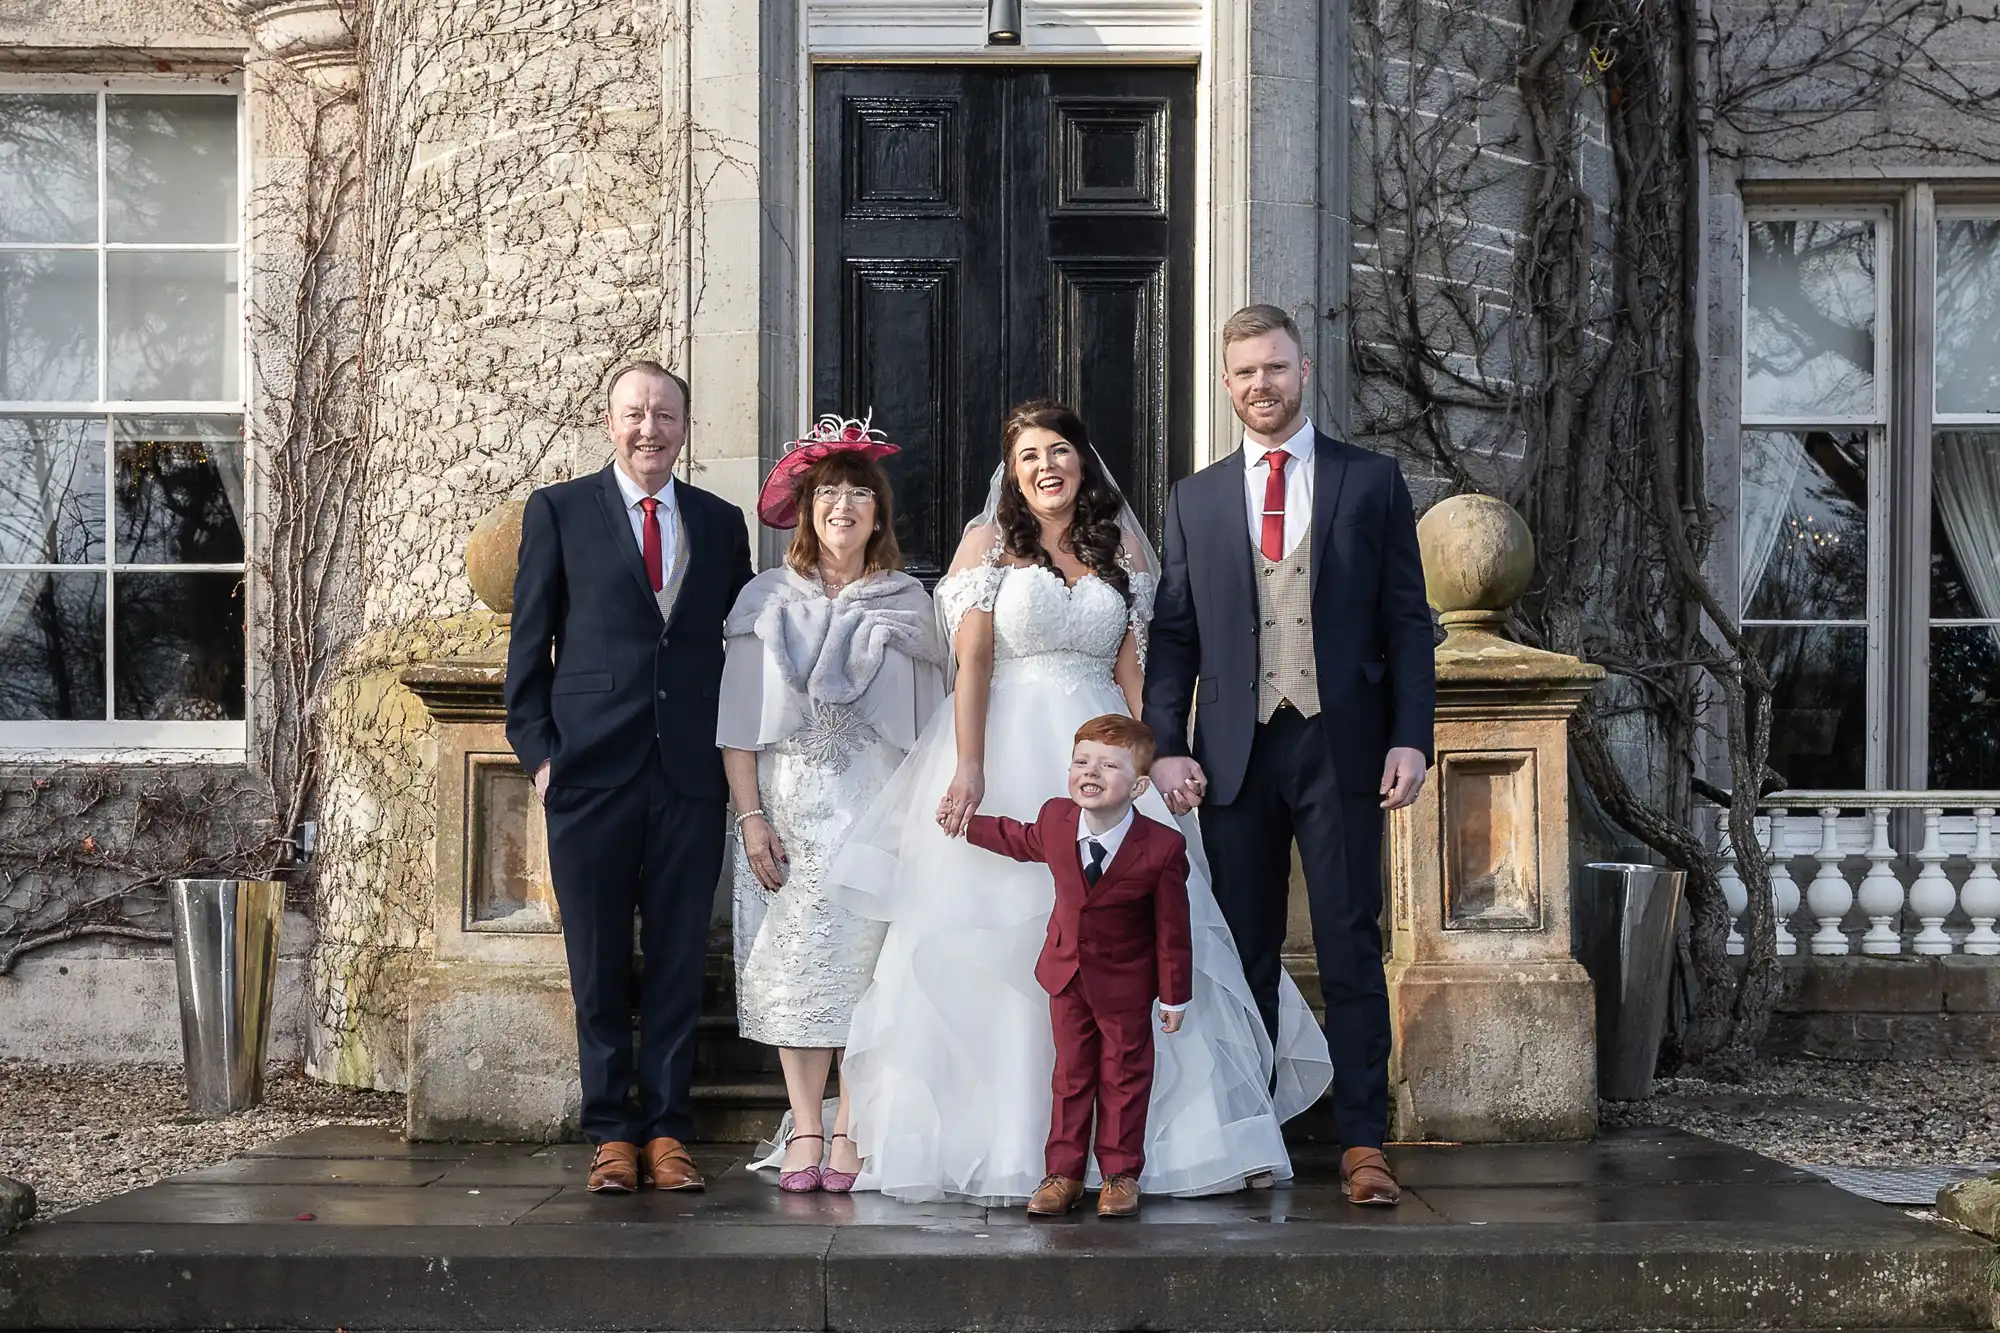 A family of five dressed in formal attire poses for a photo outside a large, old stone building with a black door. The child is wearing a red suit, and the adults are dressed in coordinated outfits.